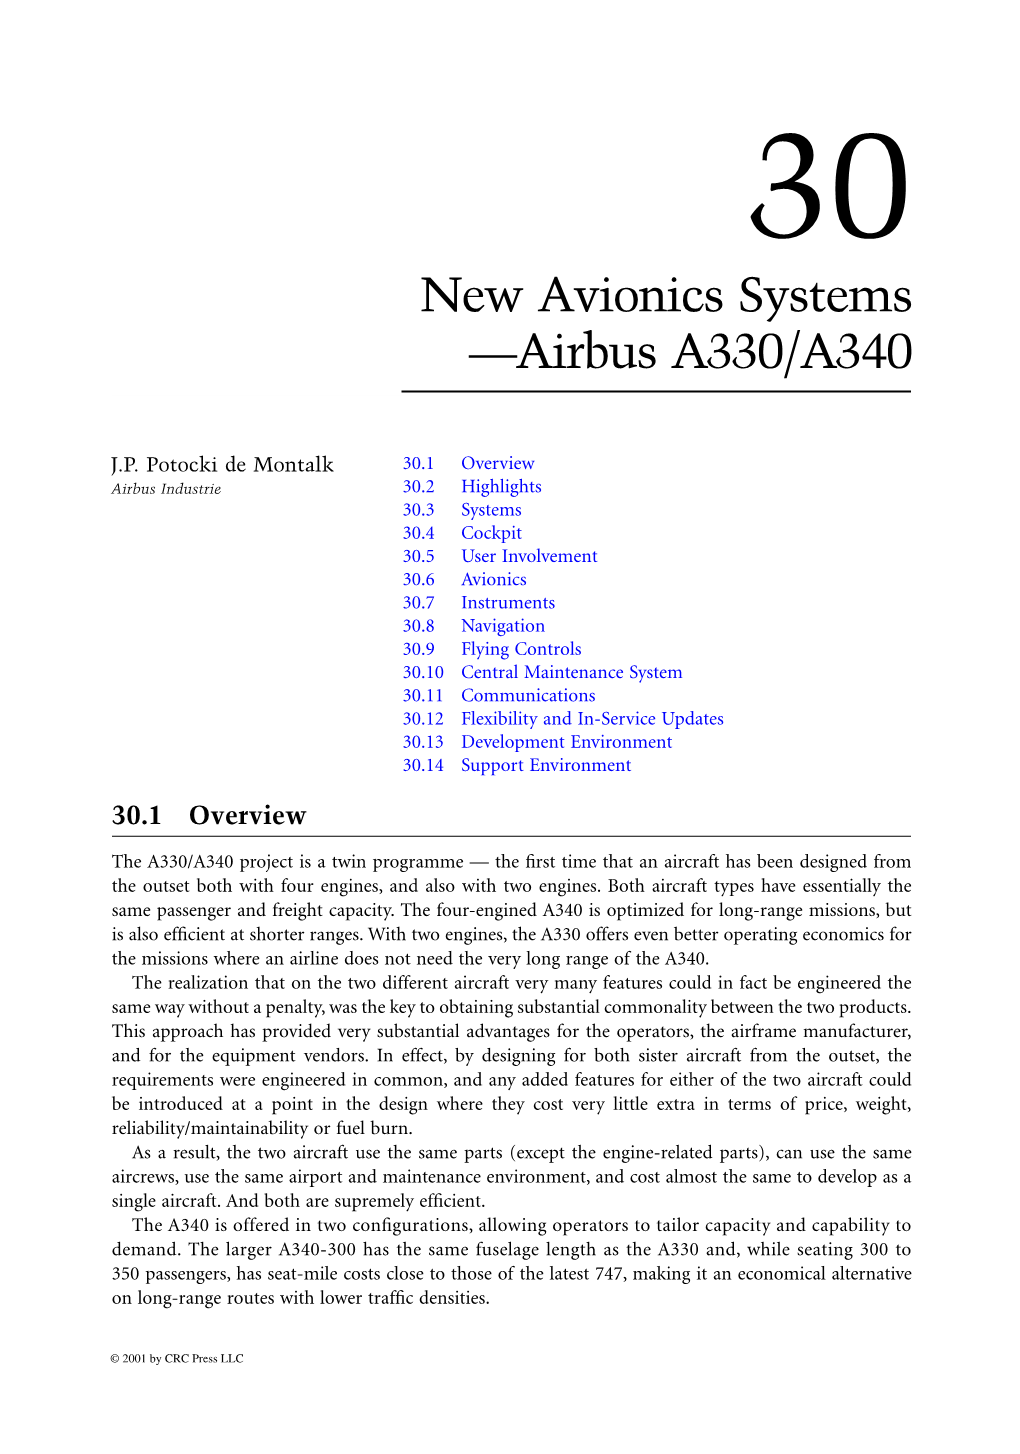 New Avionics Systems —Airbus A330/A340